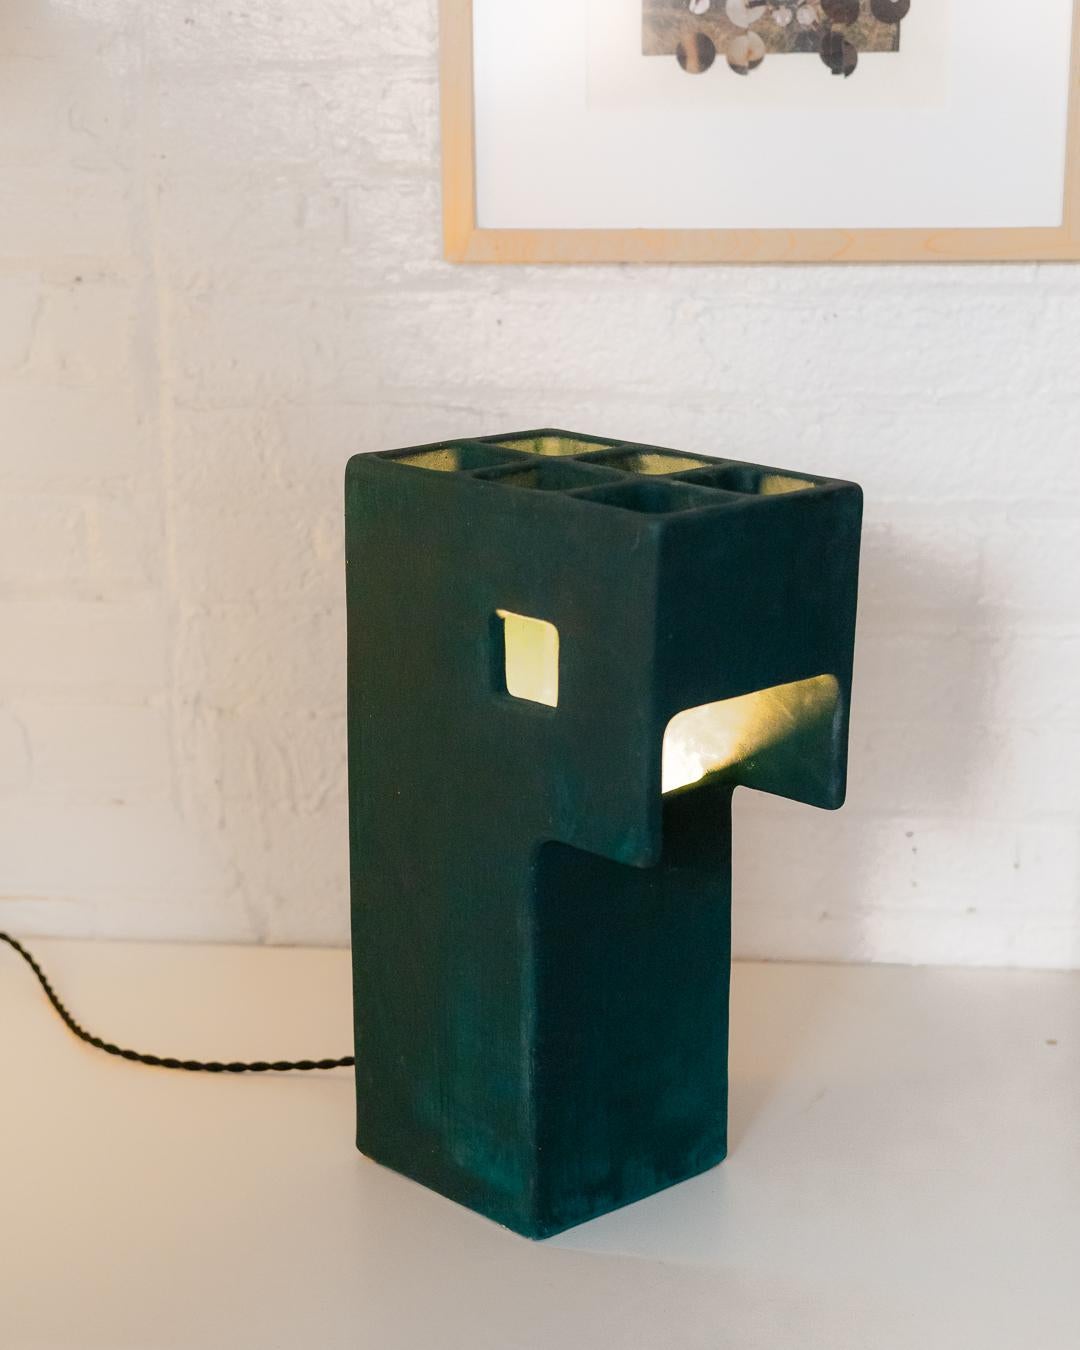 Ding Dong Table Lamp by Luft Tanaka, ceramic, dark green, brutalist, geometric For Sale 2